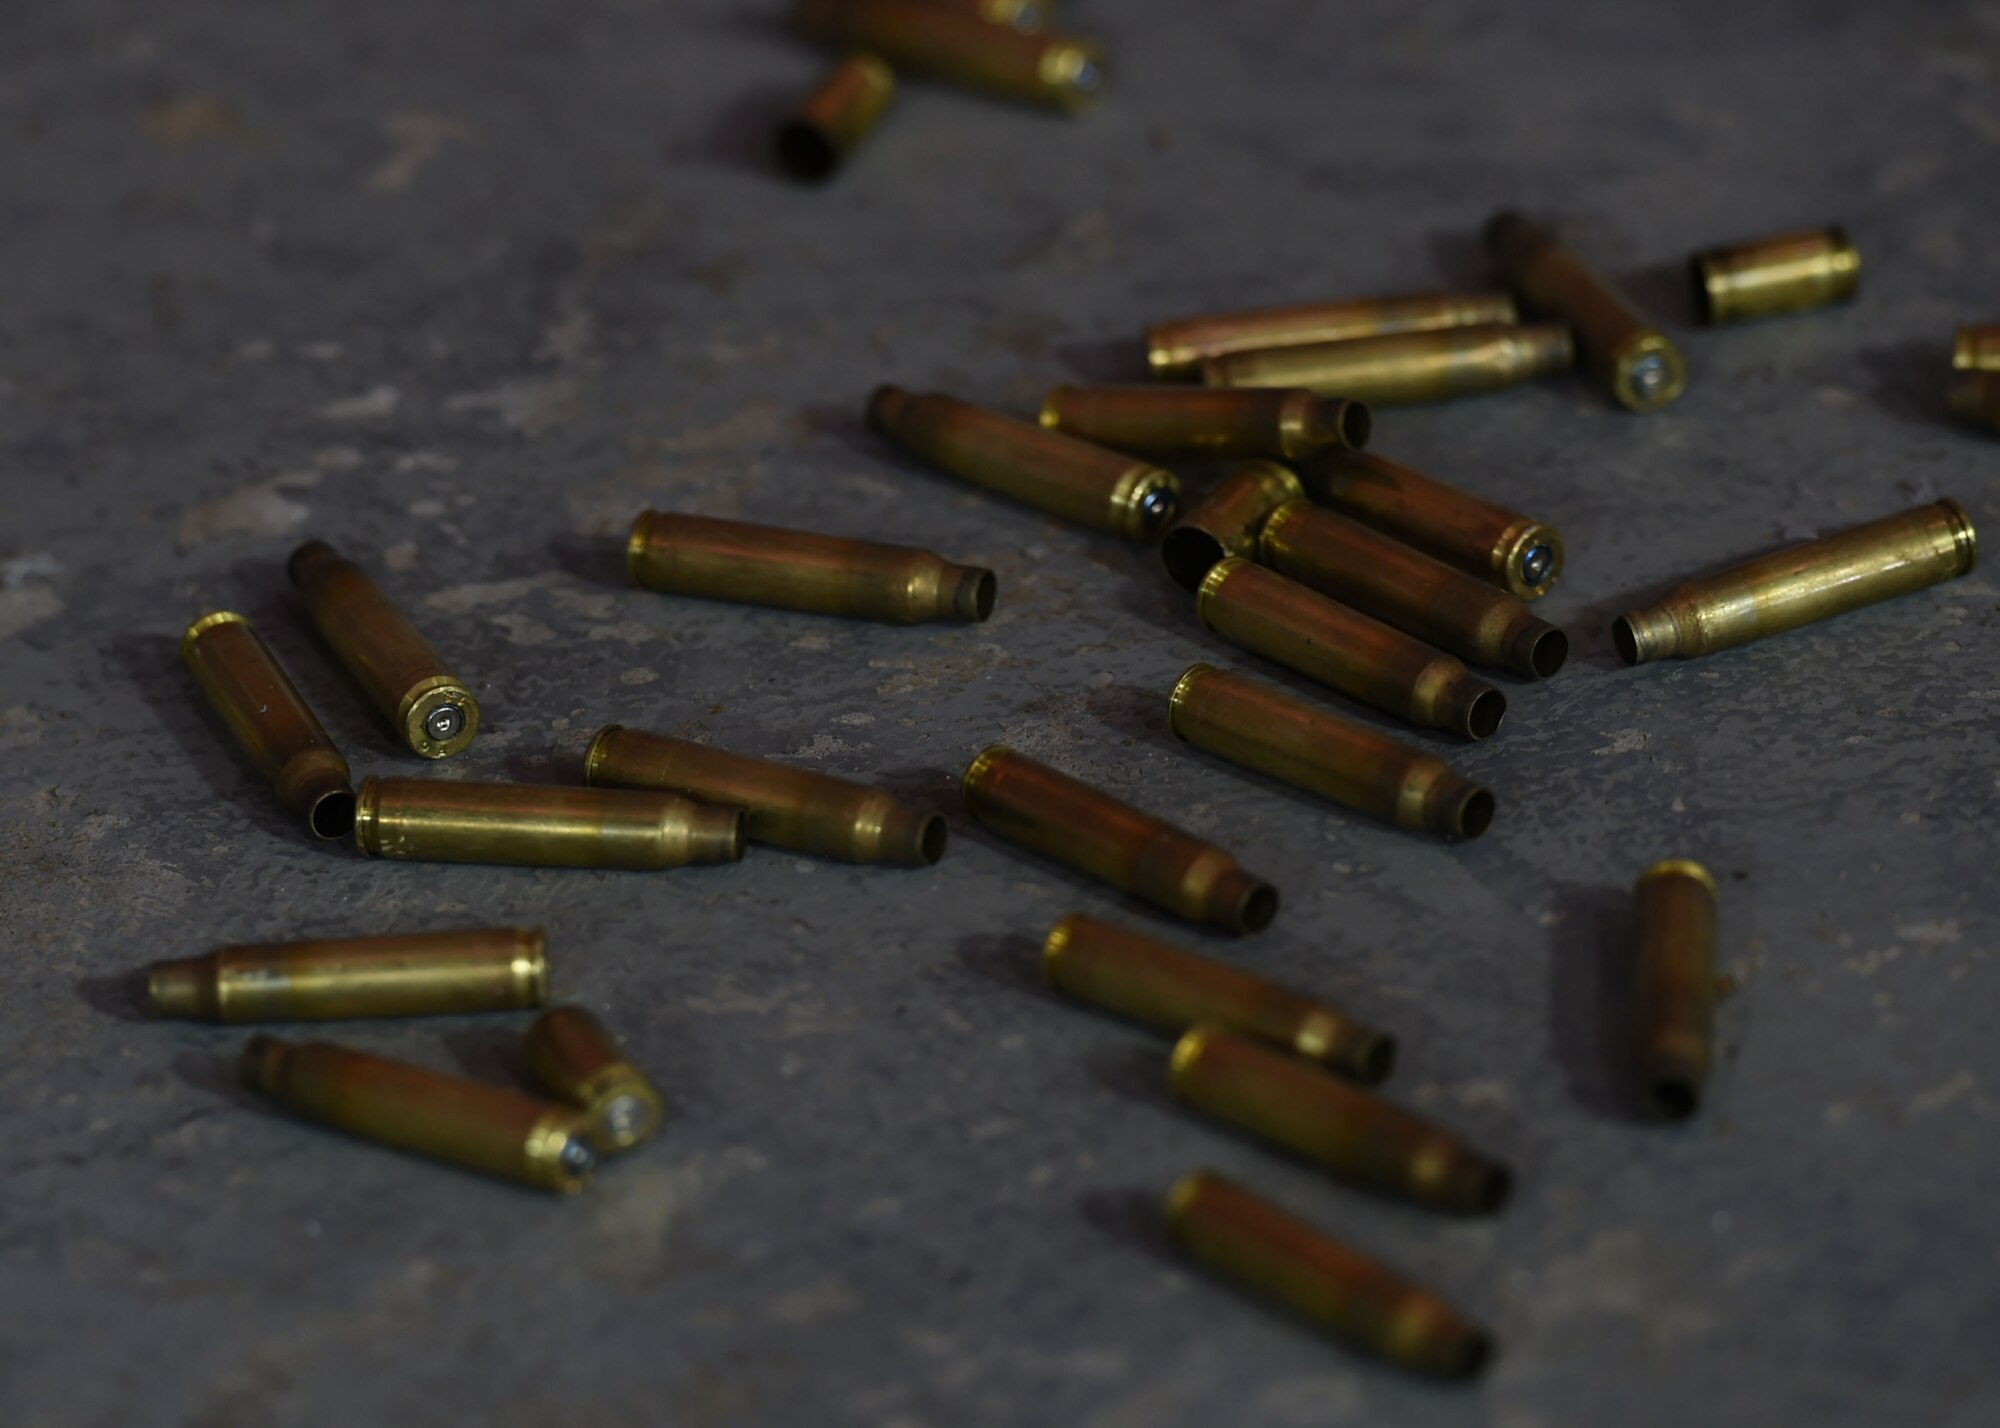 Bullet casings lie on the ground during live fire training on Sept. 14, 2016, Altus Air Force Base Okla. 97th SFS Airmen participated in a week-long training course that taught hand-to-hand defensive and subduing techniques, weapons handling and clearing and securing buildings, aircraft and buses as a team. (U.S. Air Force photo by Airman 1st Class Kirby Turbak/Released)   